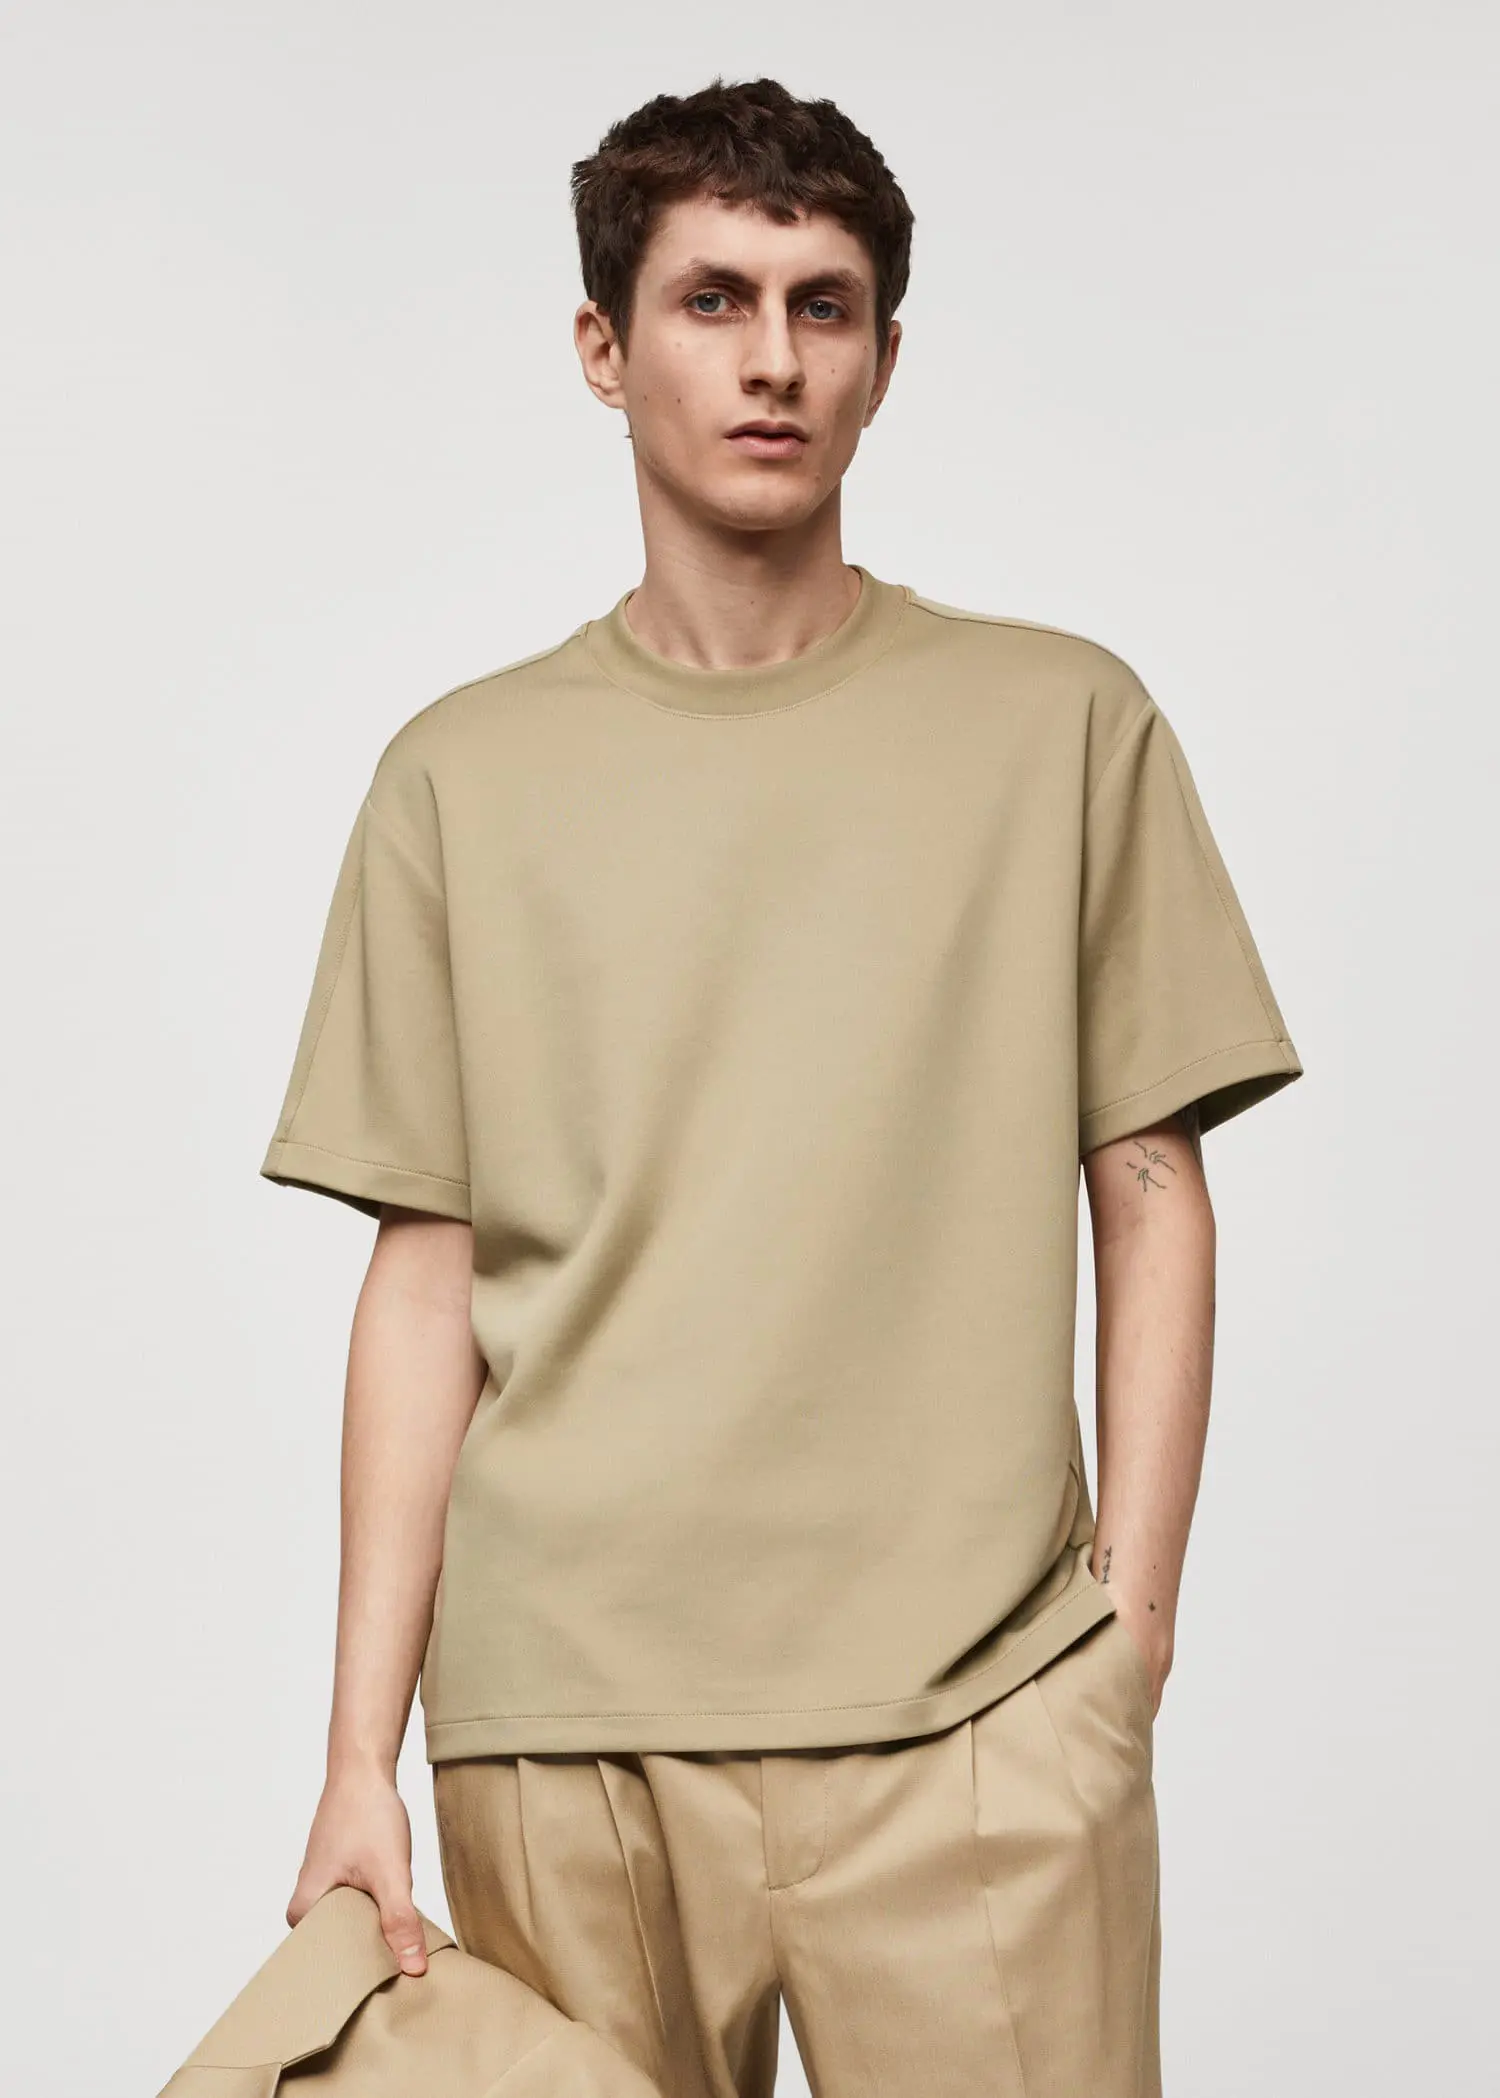 Mango T-shirt relaxed-fit tessuto stretch. 2